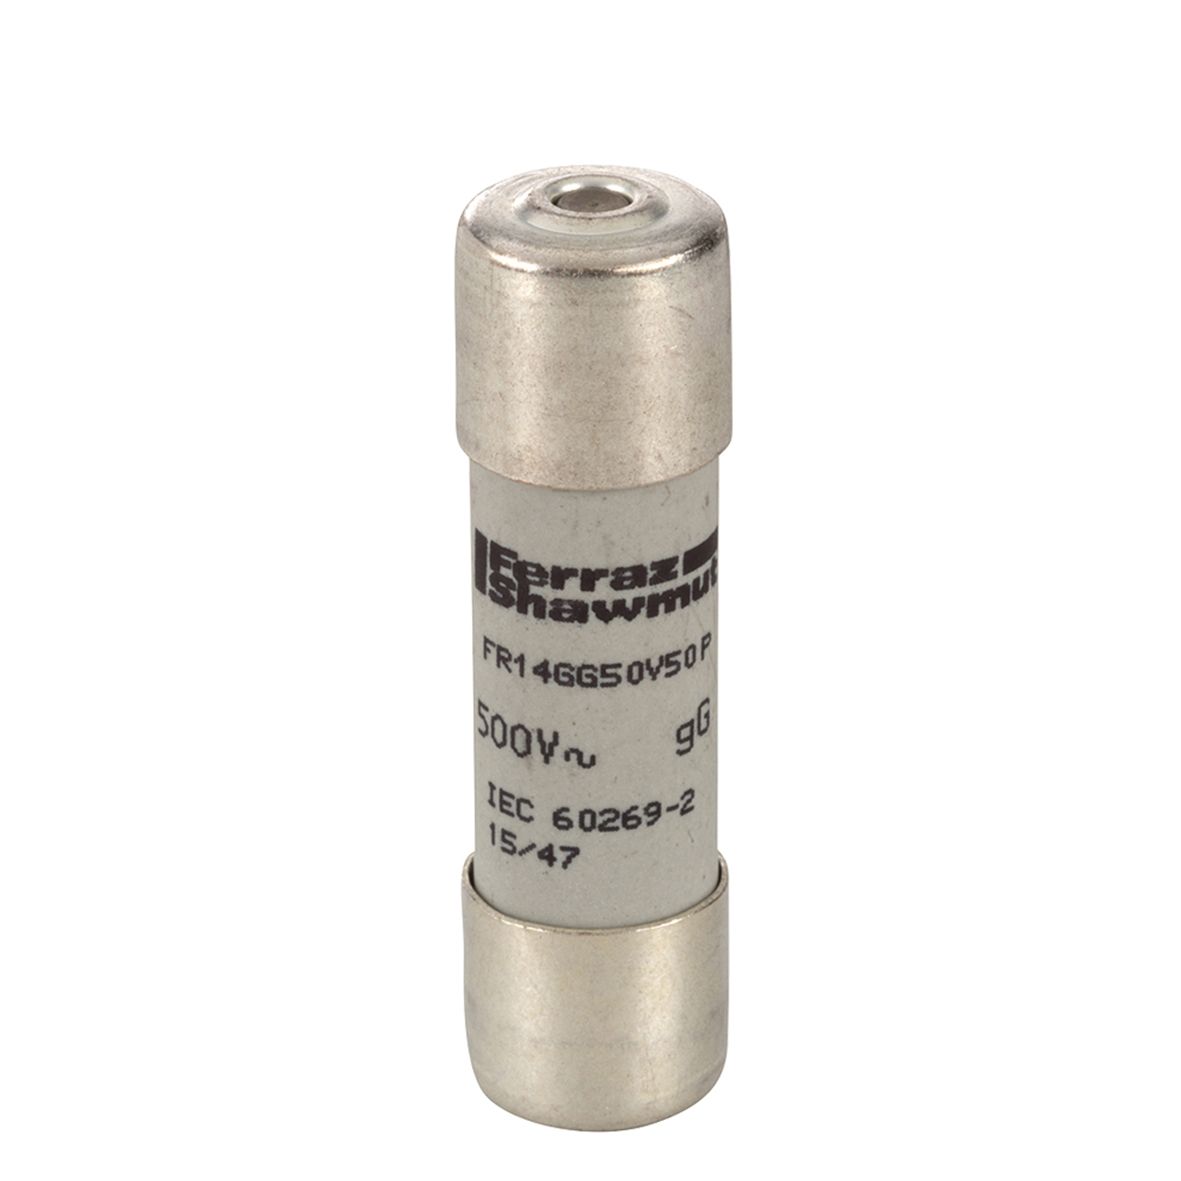 D211557 - Cylindrical fuse-link gG 500VAC 14.3x51, 50A with striker